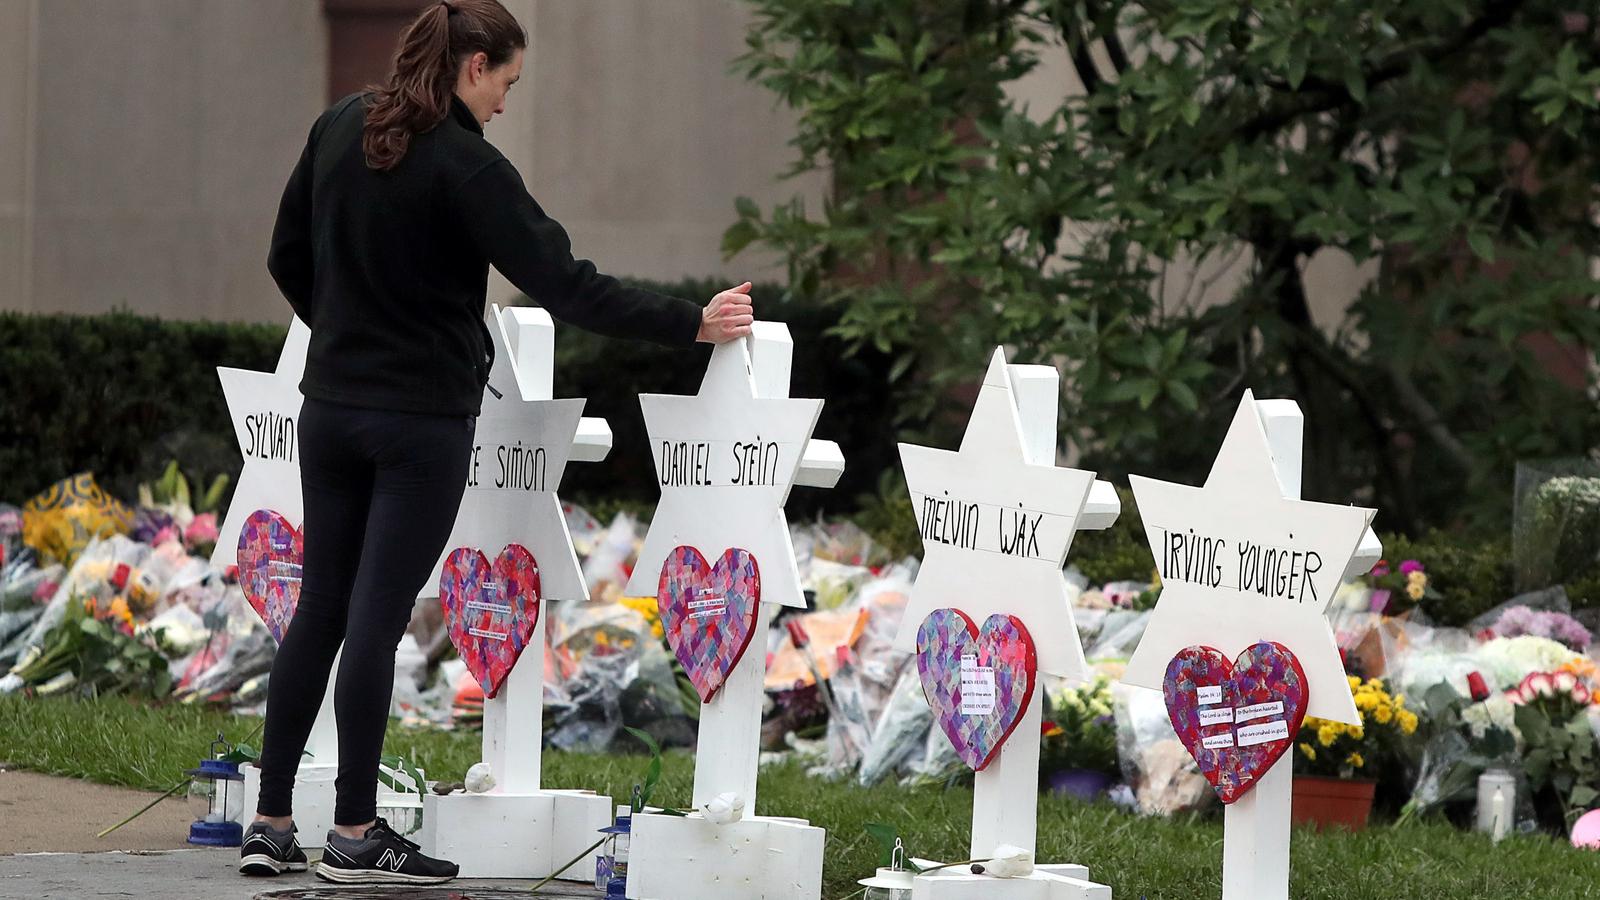 A woman touches a white Jewish star memorial for Tree of Life victim 